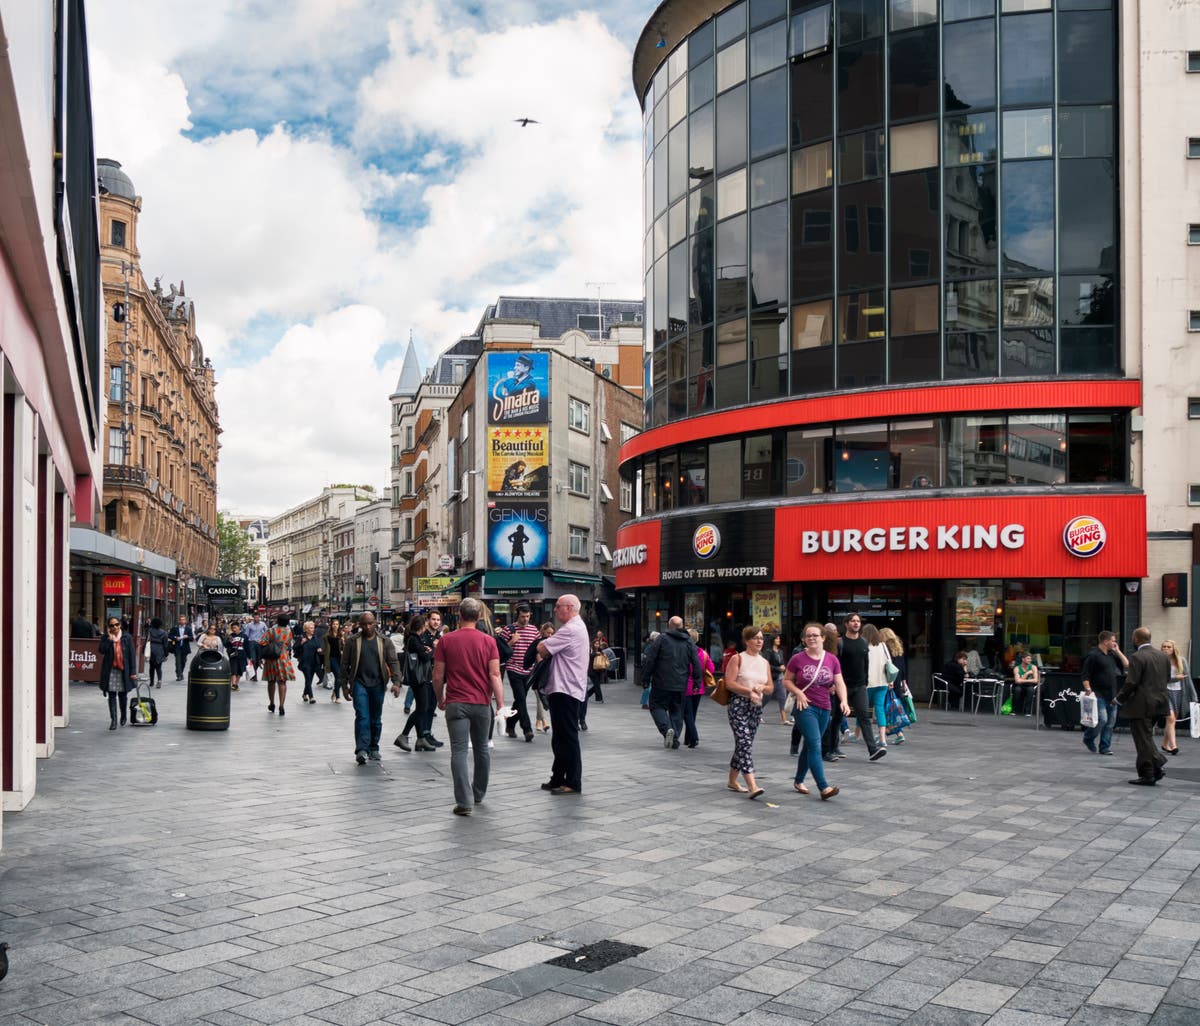 Leicester Square brawl: 12-year-old girl arrested after man hit in head with bottle